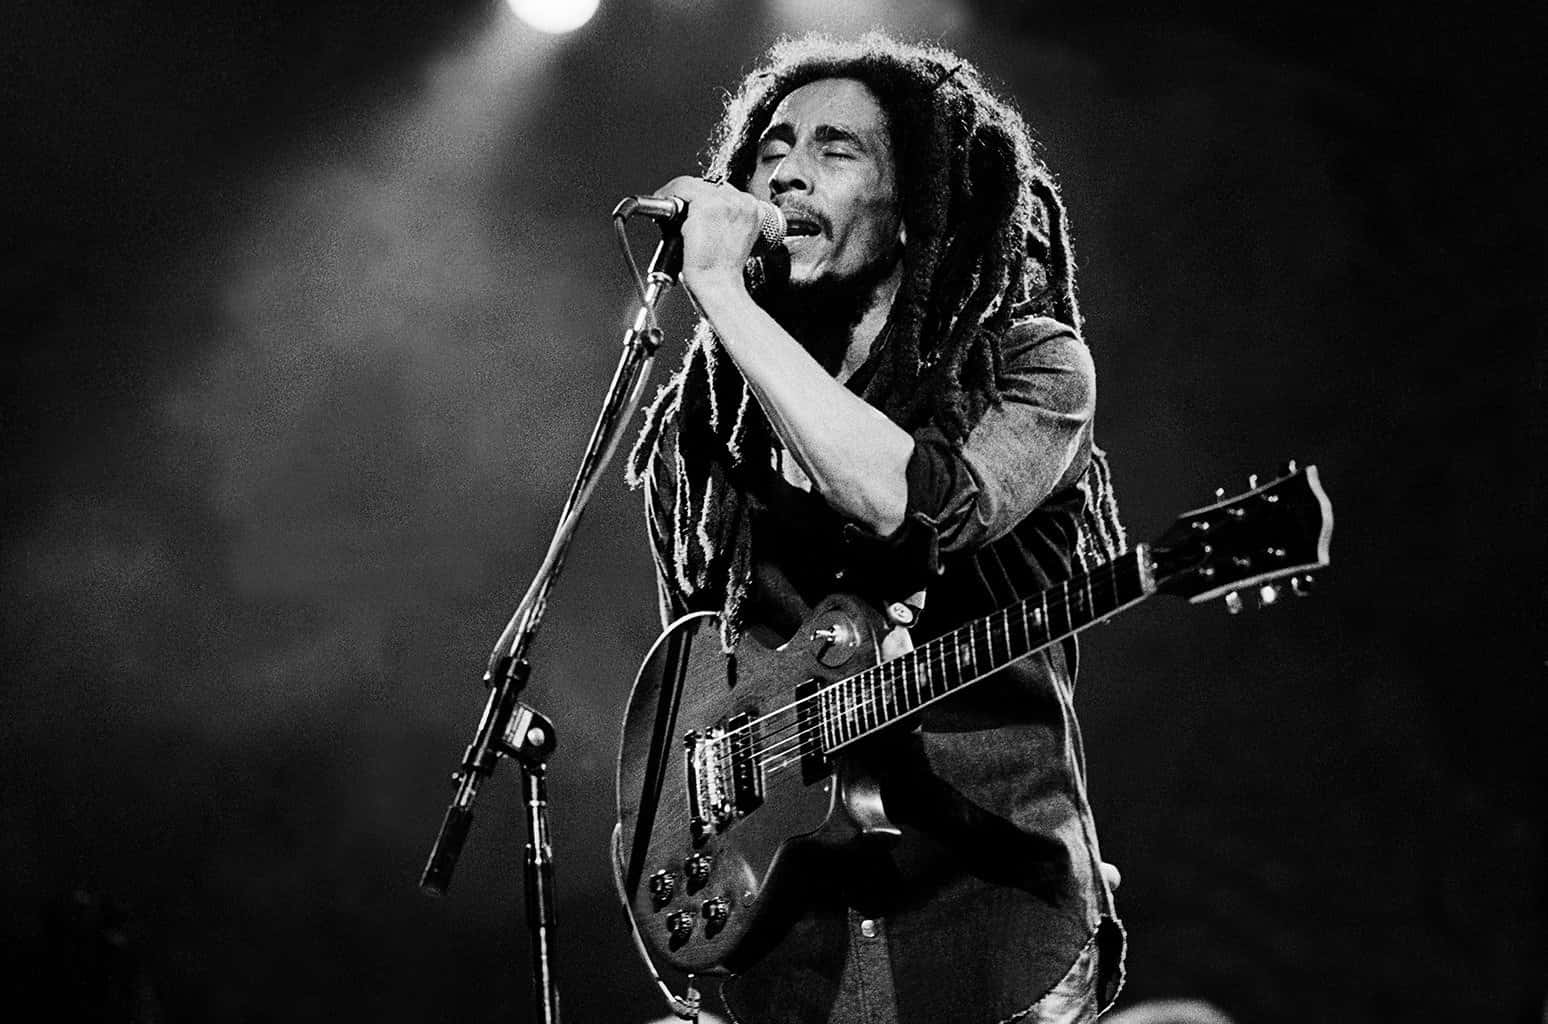 "My Music is My Voice of Protest" - Bob Marley